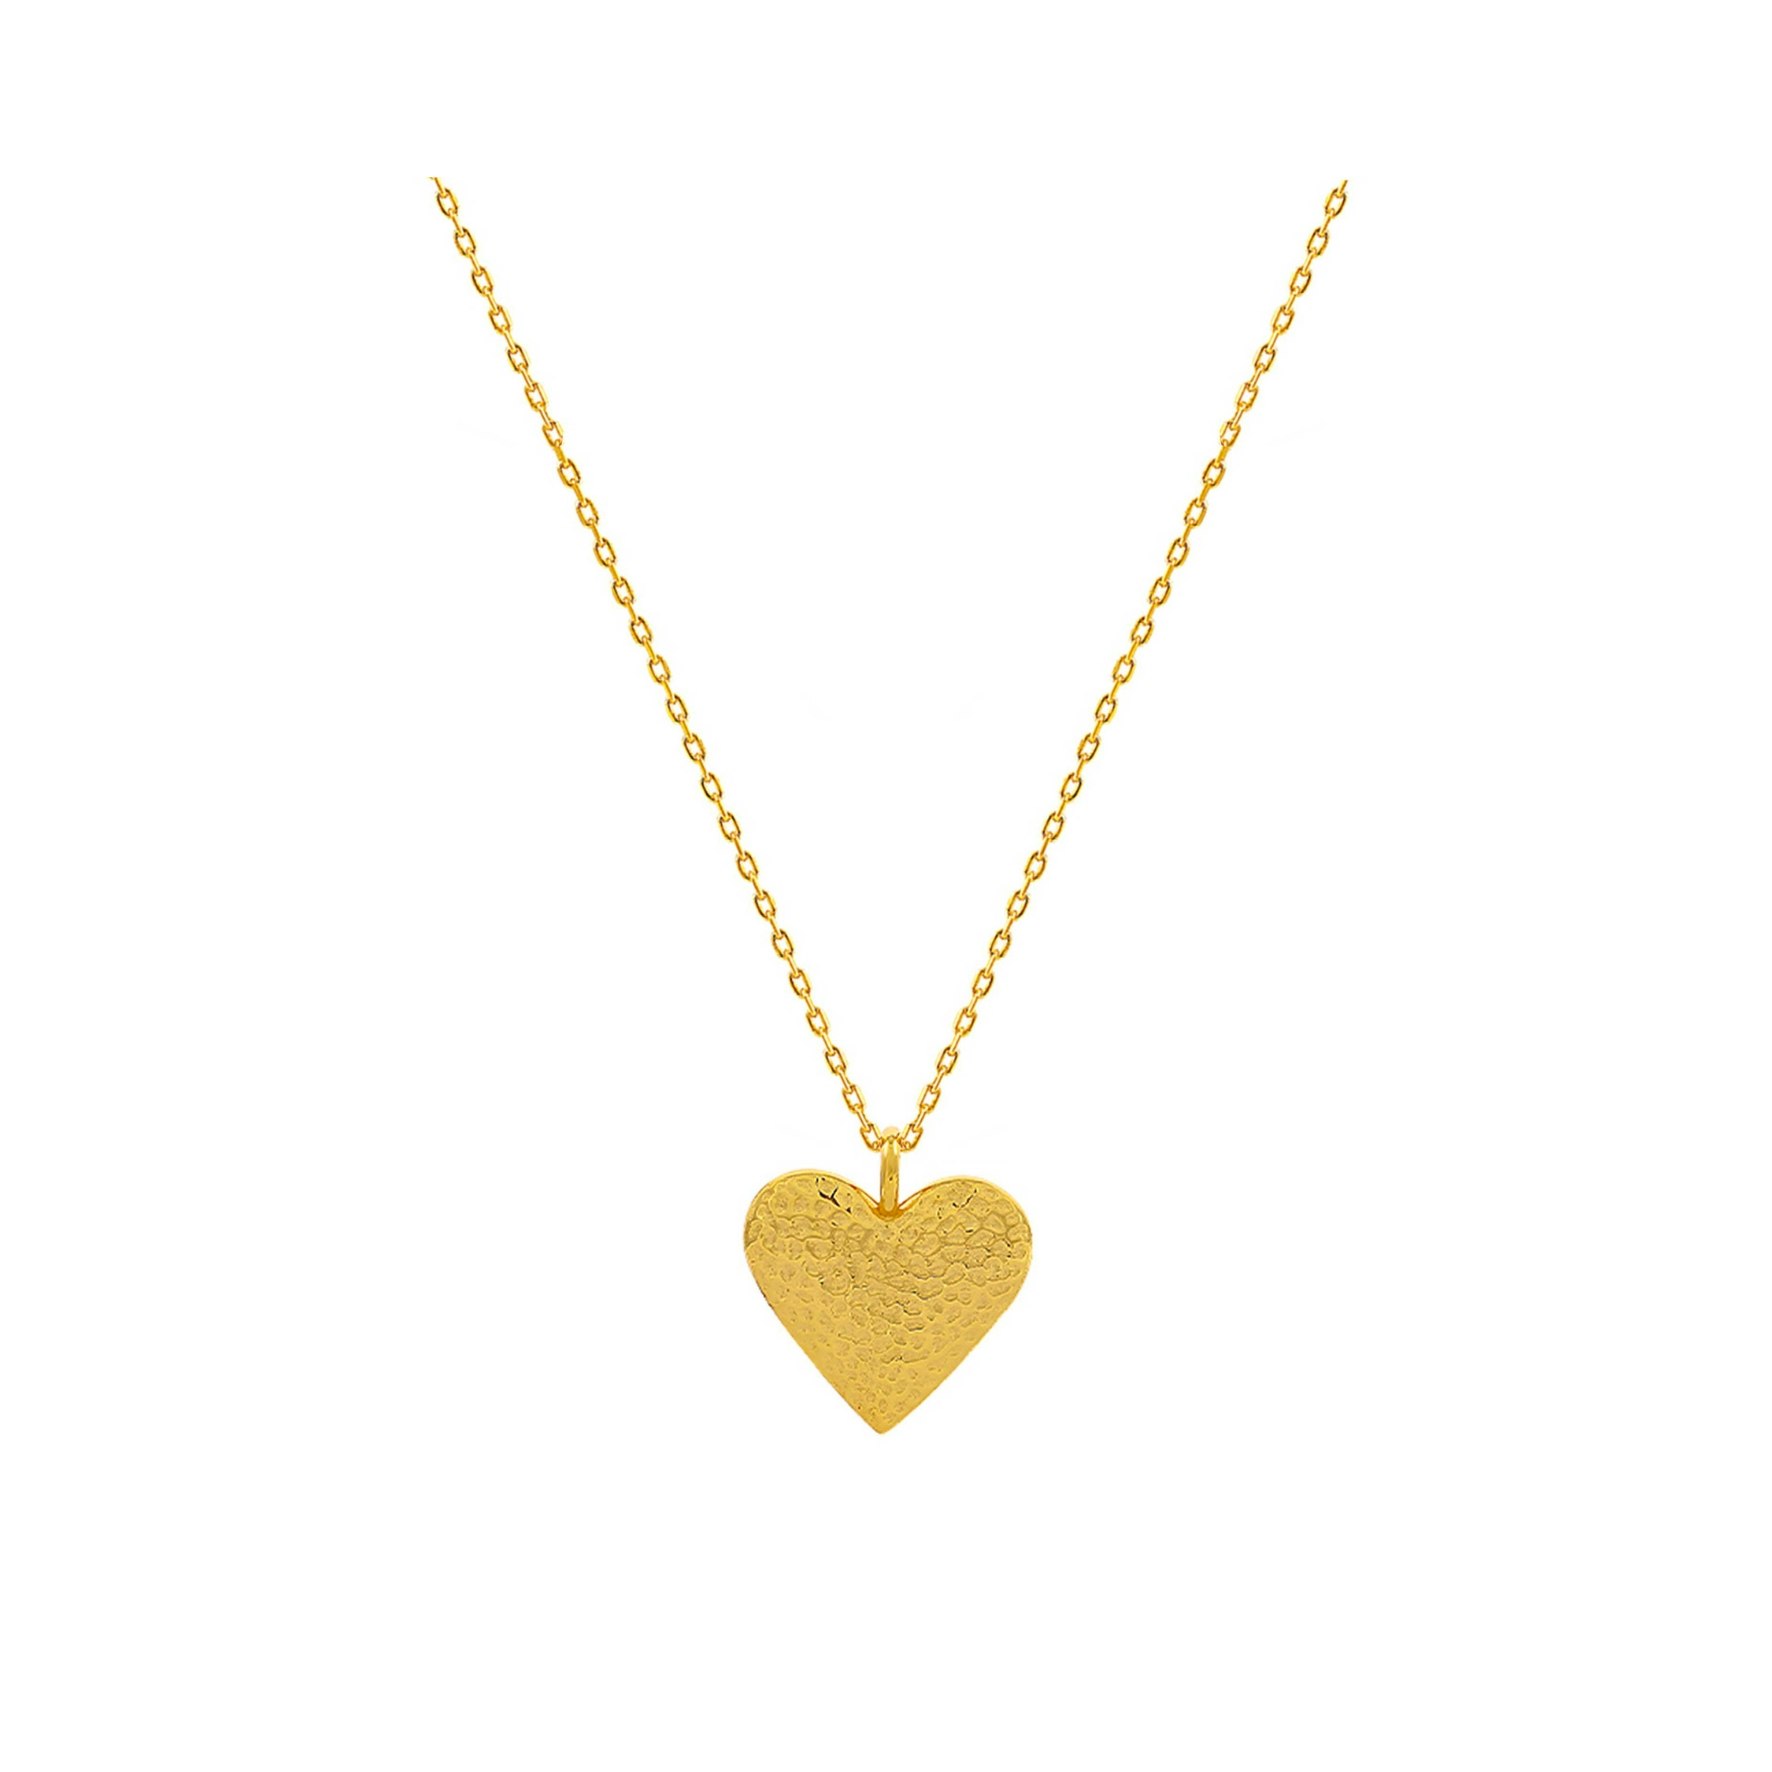 Heart Necklace from Hultquist Copenhagen in Goldplated Silver Sterling 925